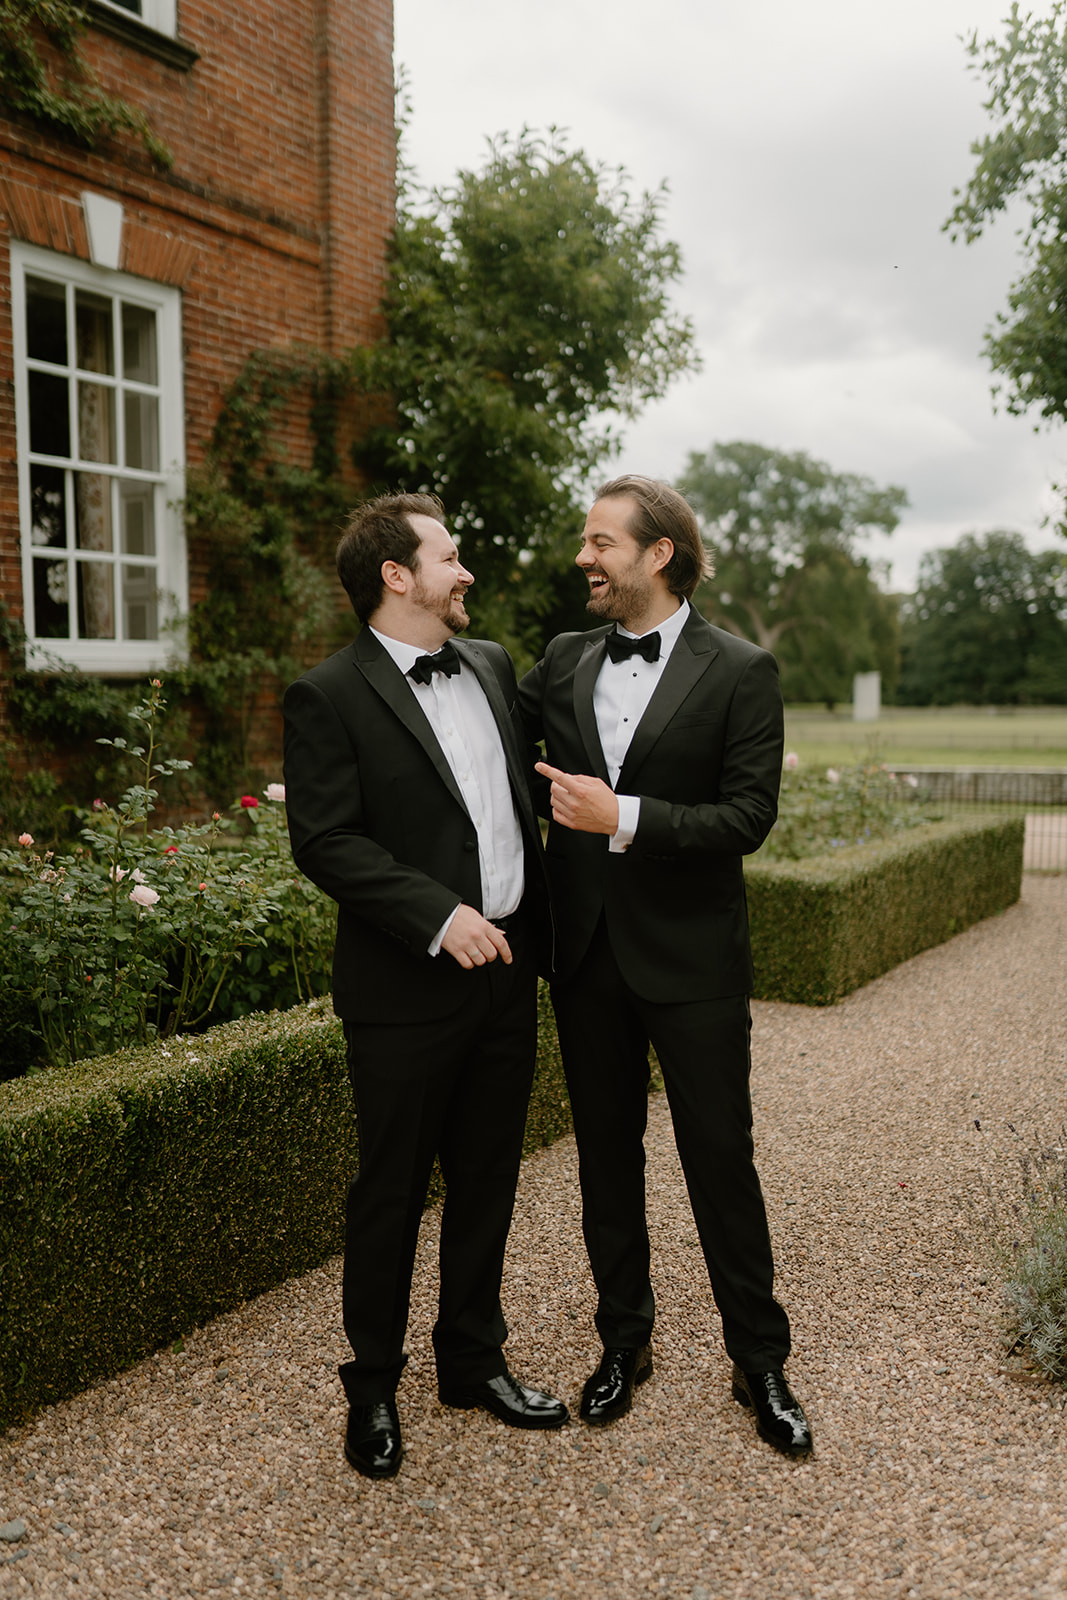 A bridegroom laughs with his best man as they wear black tie standing outside in the gardens of a Manor House